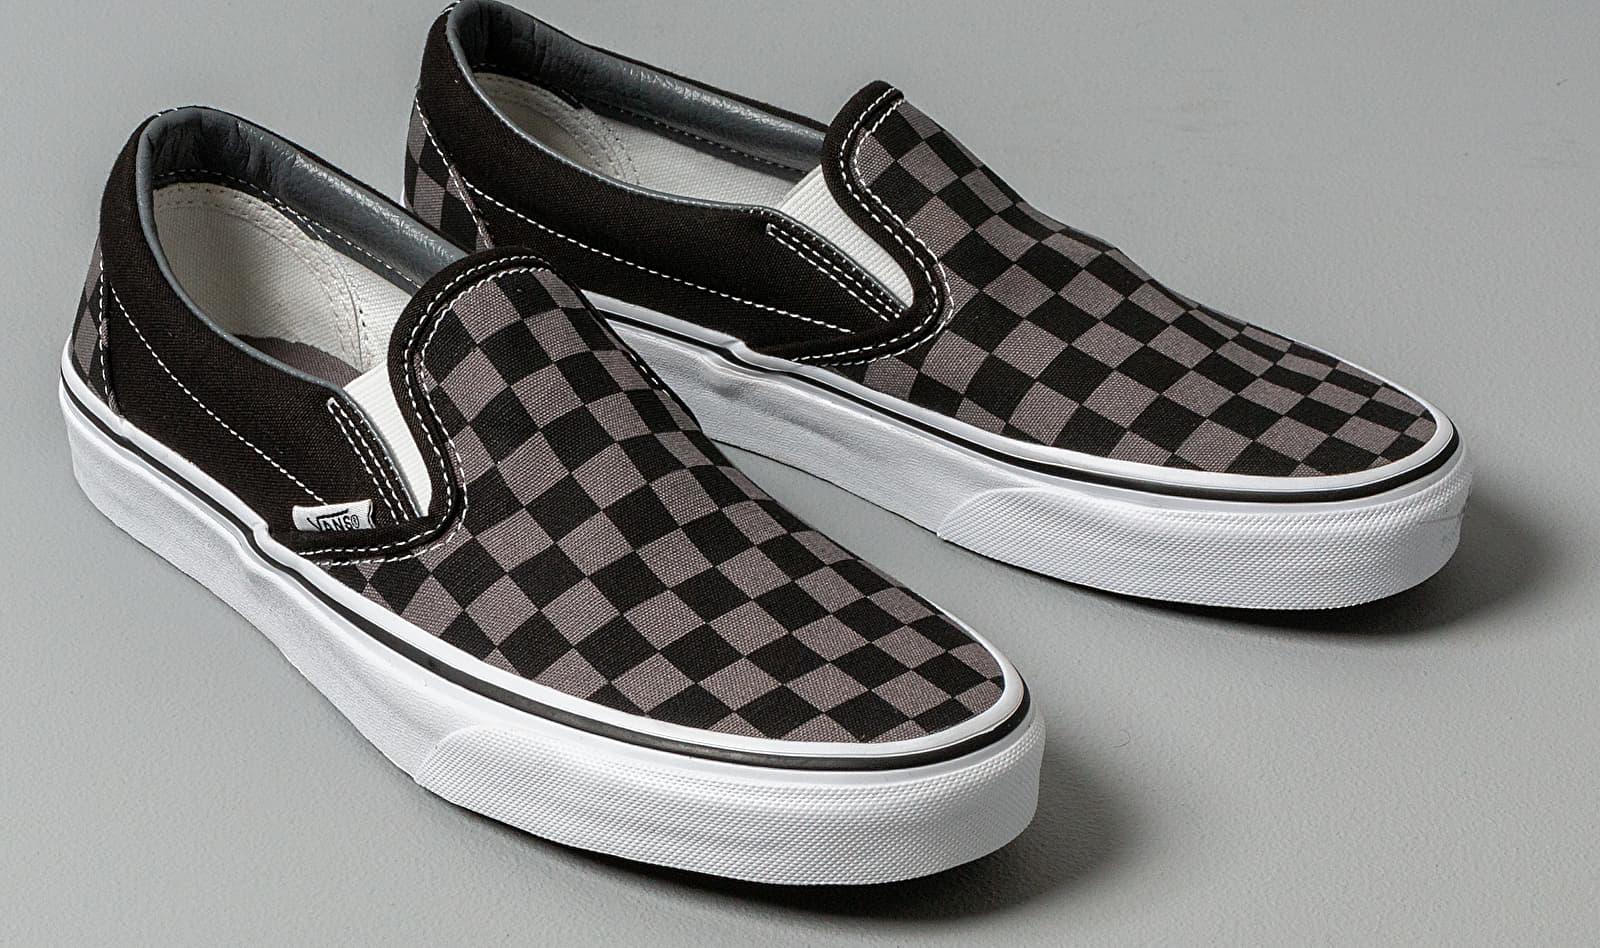 Classic Slip On White S Trainers (11.5 B(m) Us / D(m) Us , Black Pewter Grey Checkerboard) - Lyst